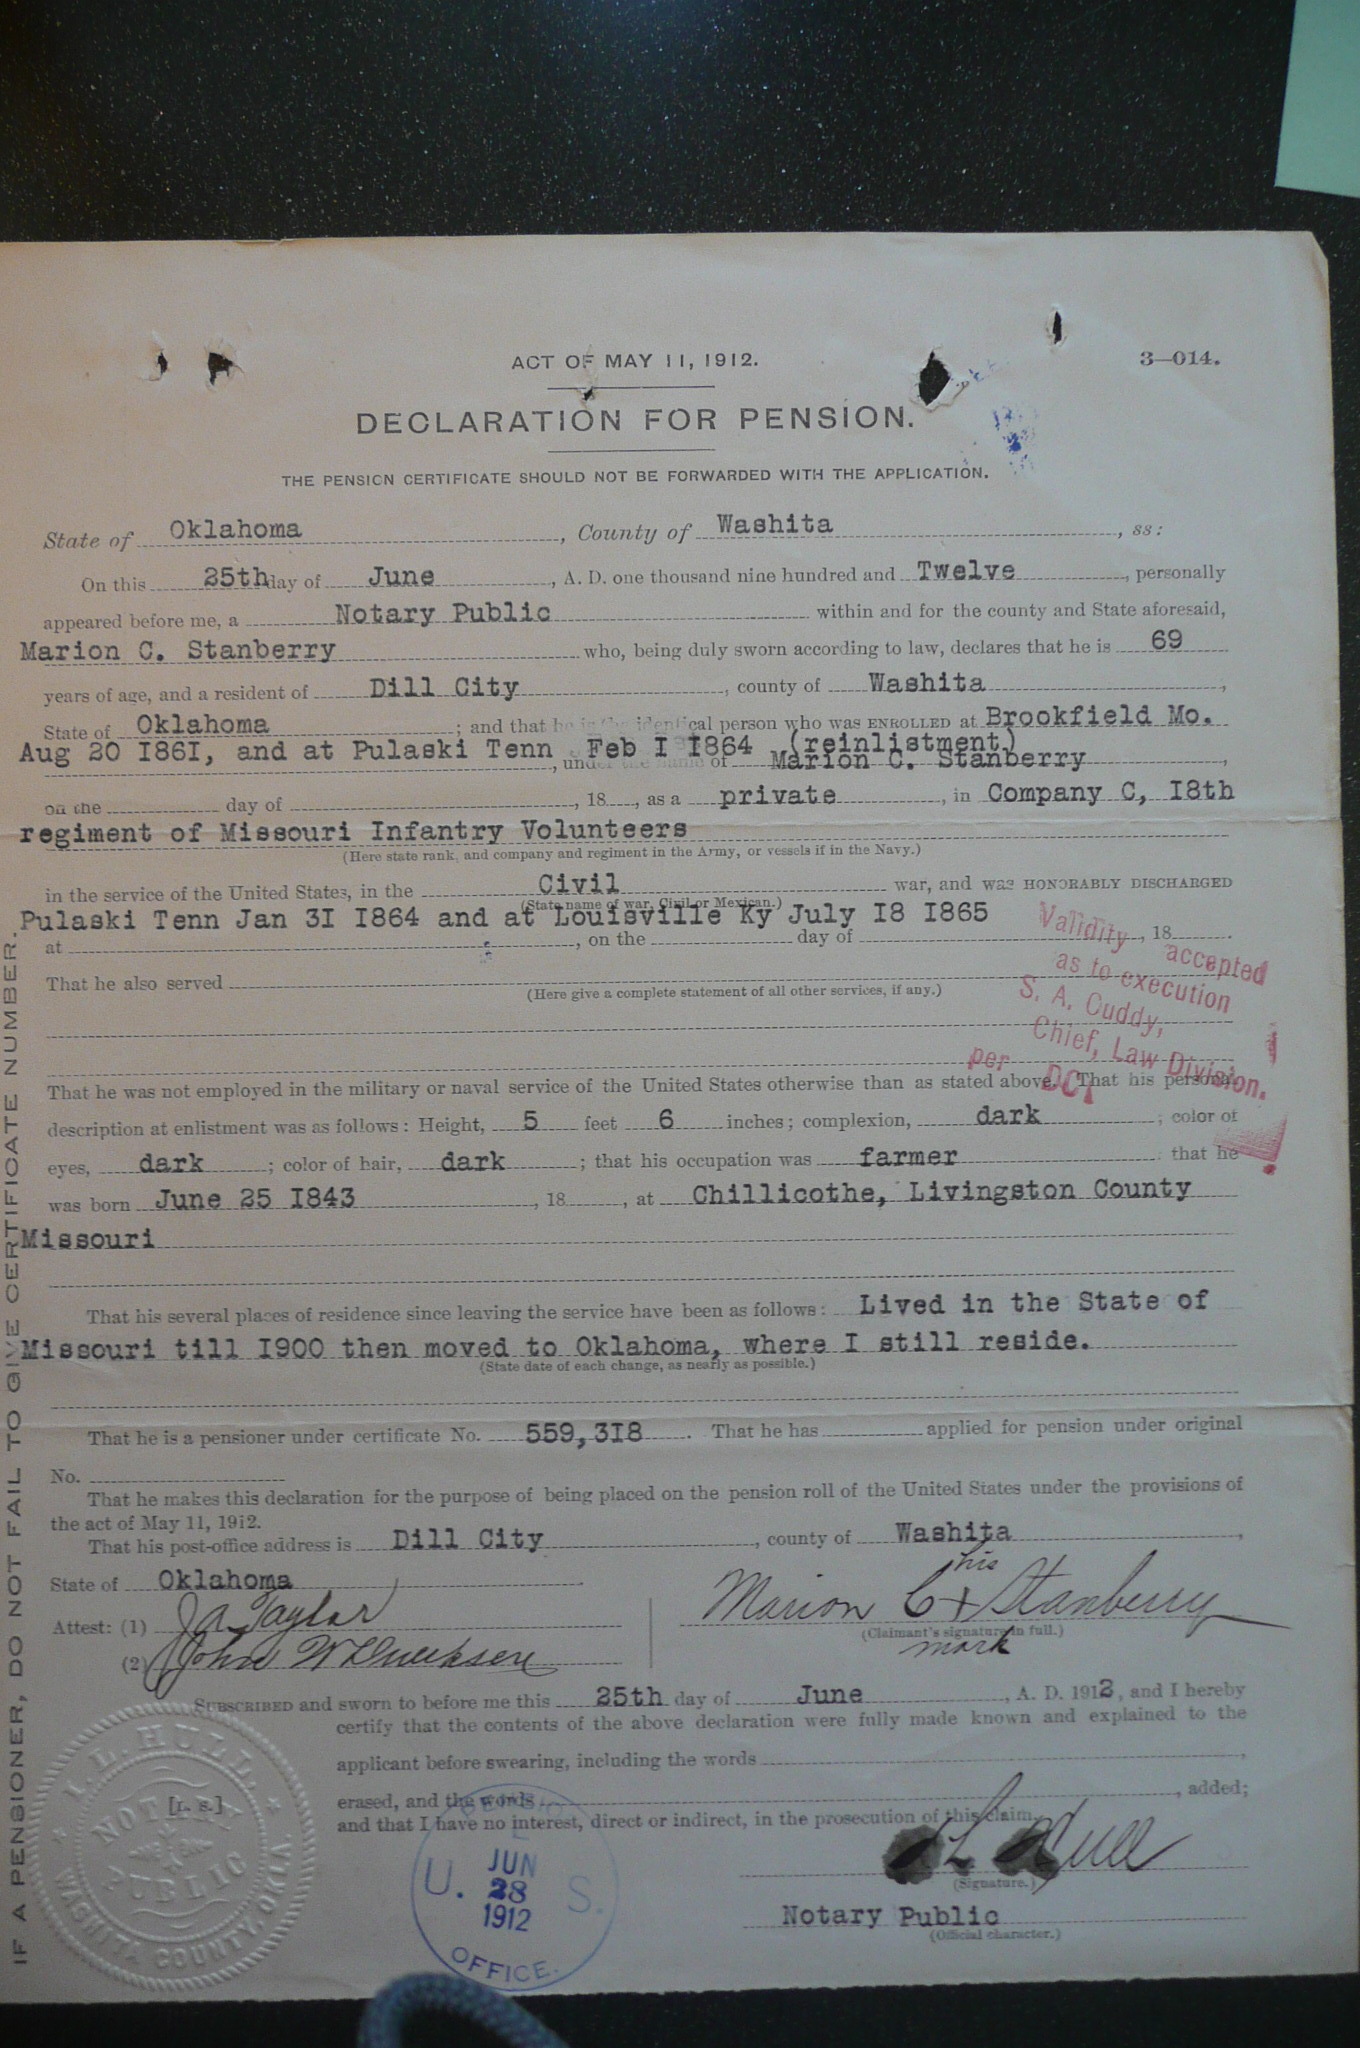 Soldier's Declaration for Pension, 1912